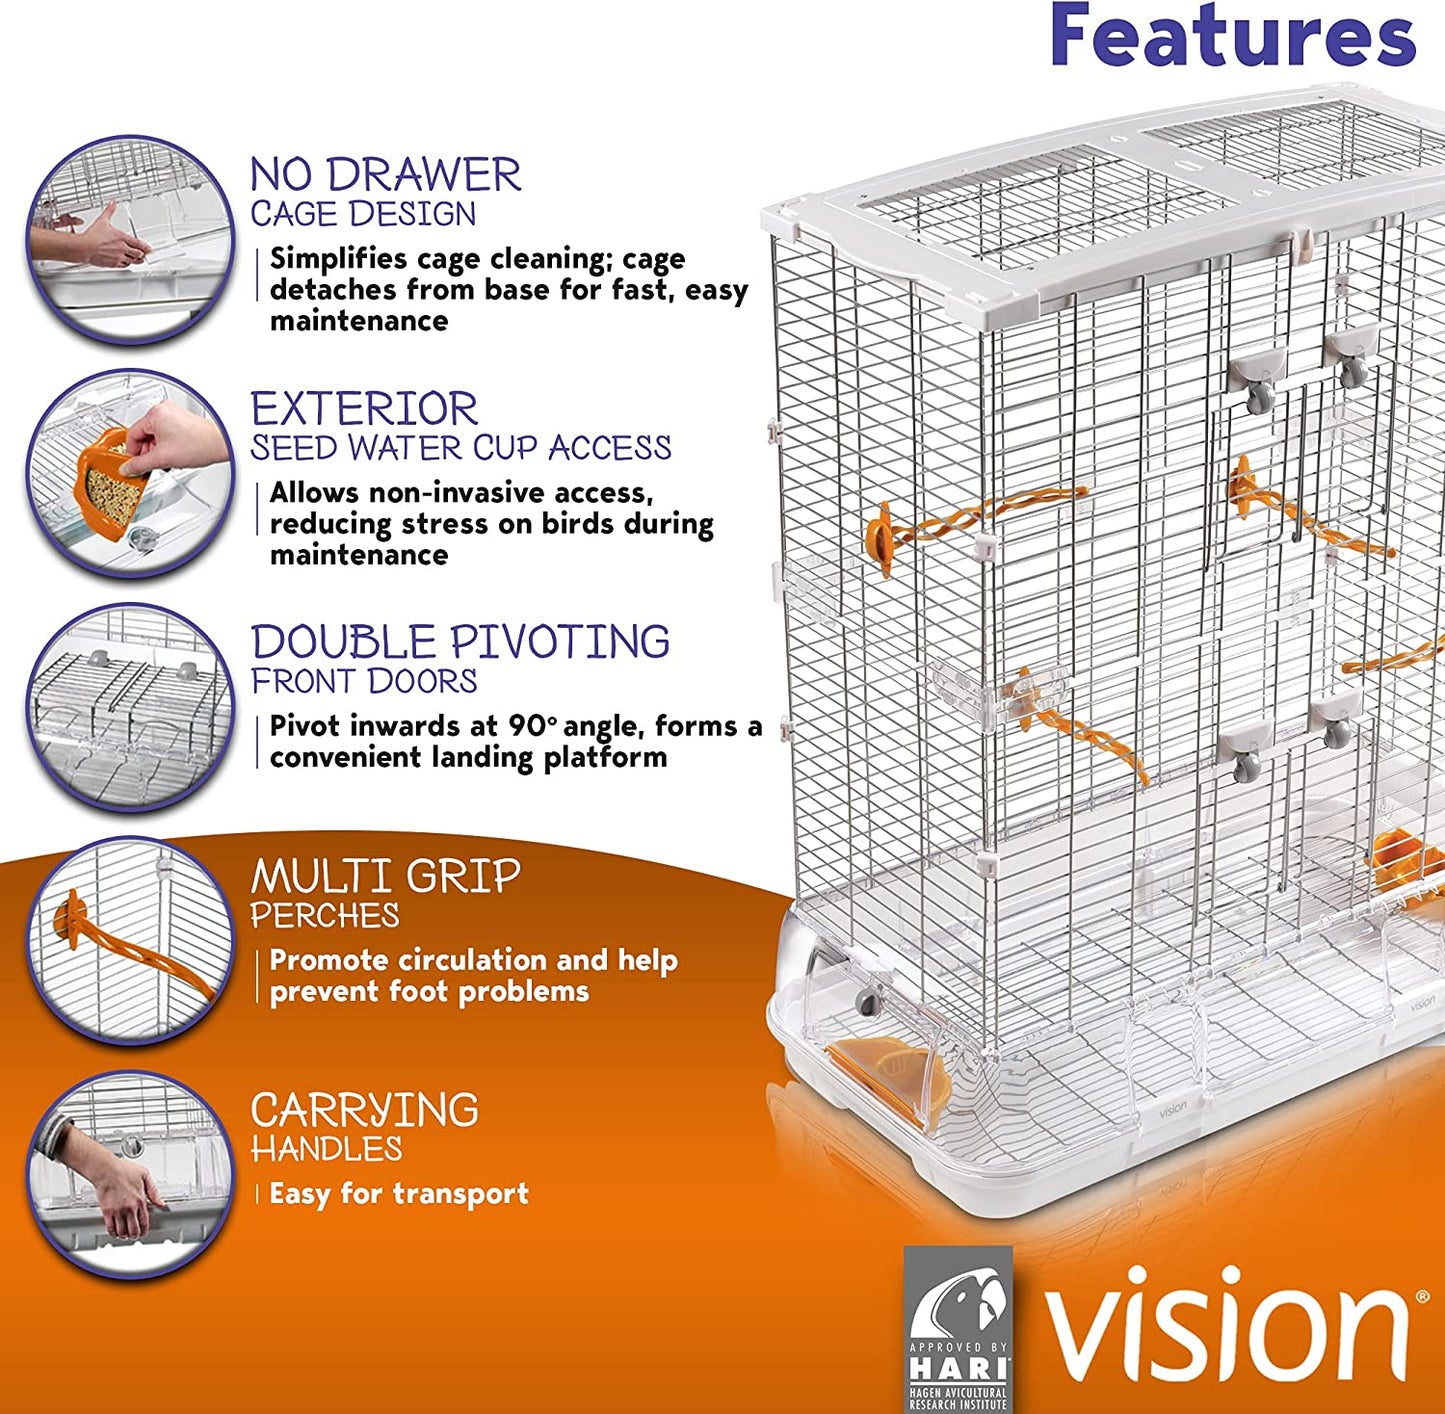 Vision Bird Cage L12 Large Tall (30.7 x 36.6 x 16.5 inches)